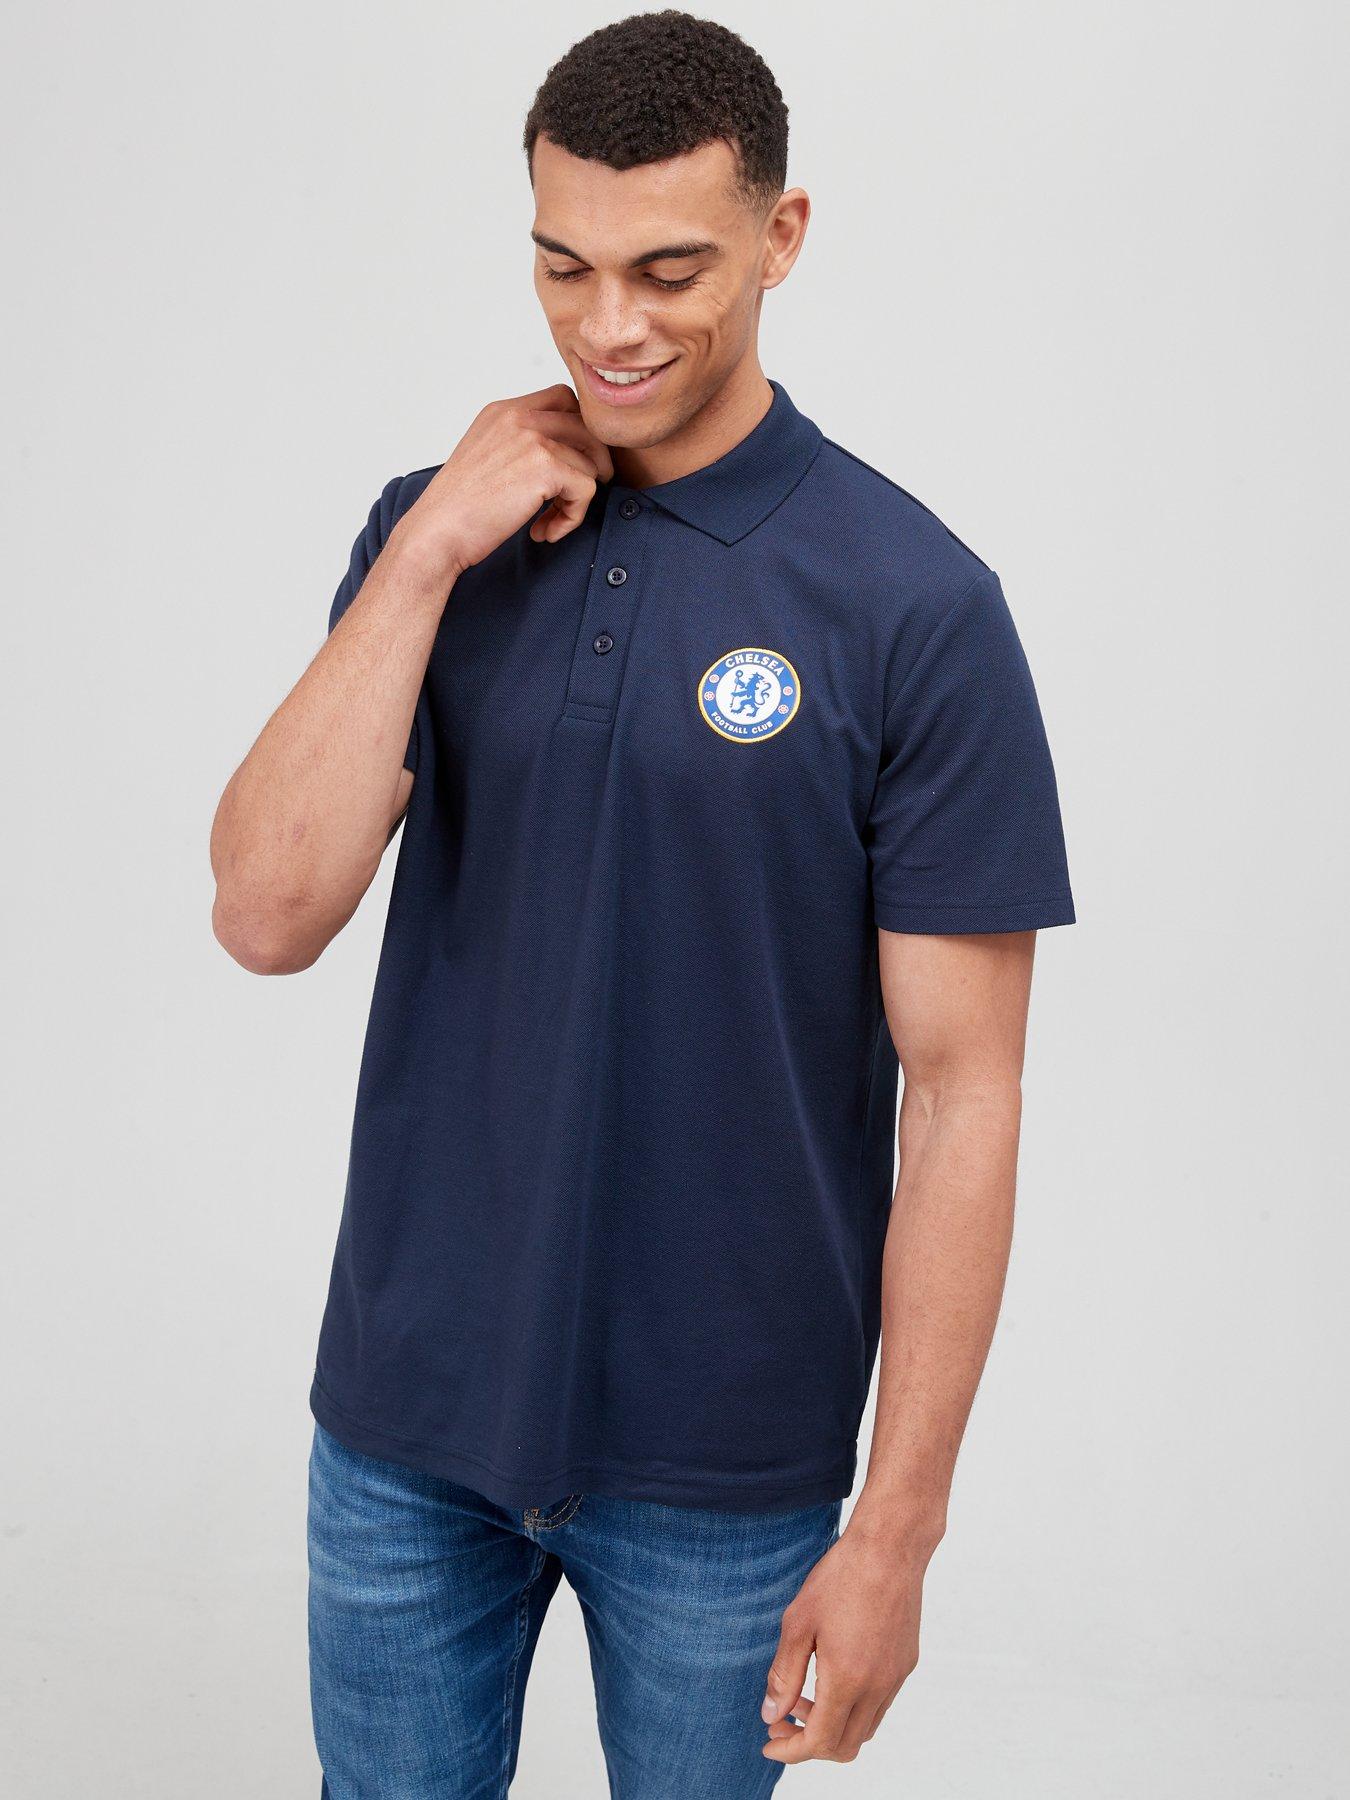 Chelsea Source Lab Chelsea FC Mens Tipped Polo Shirt - Navy | very.co.uk